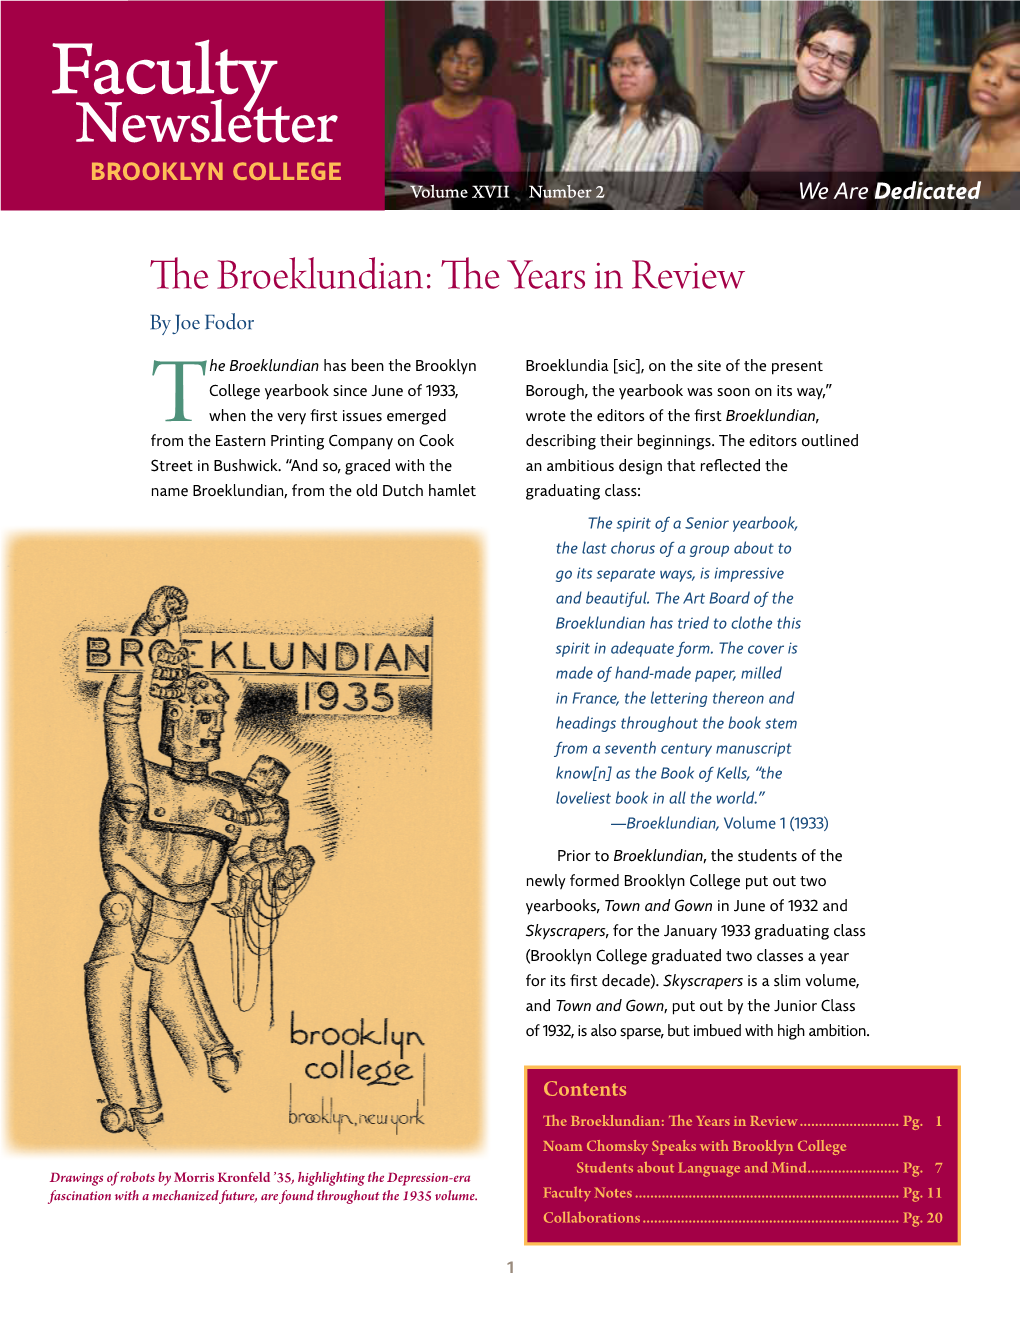 Faculty Newsletter Brooklyn College Volume XVII Number 2 We Are Dedicated